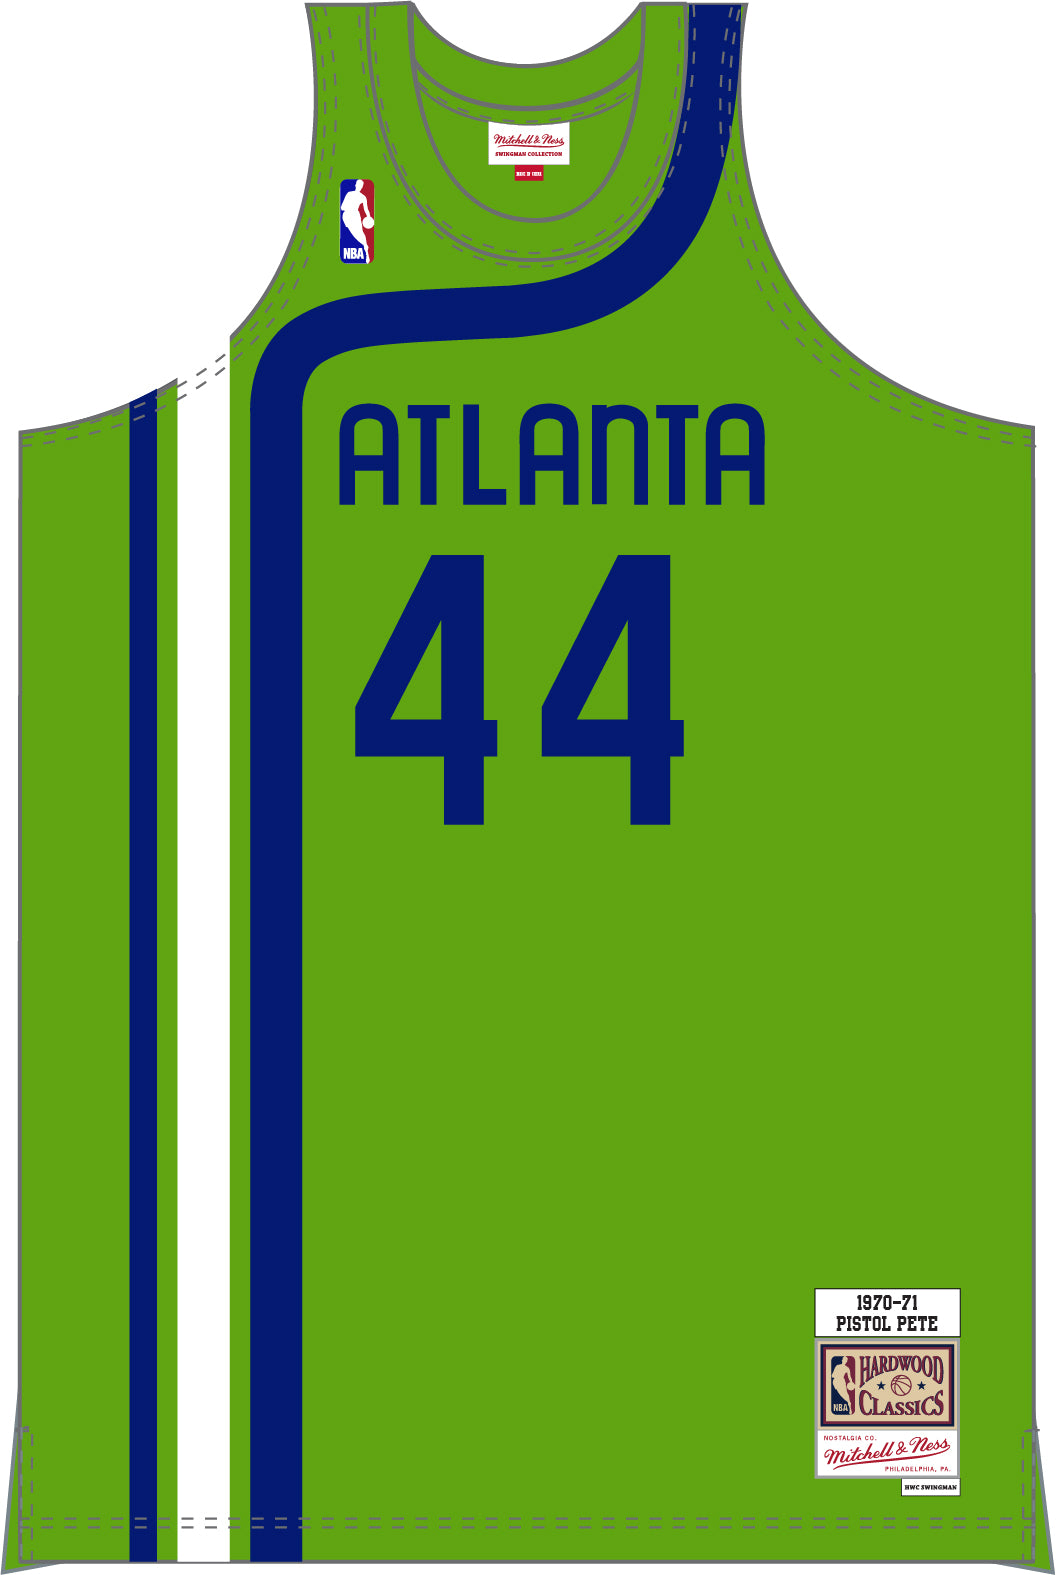 Hawks jersey with player name